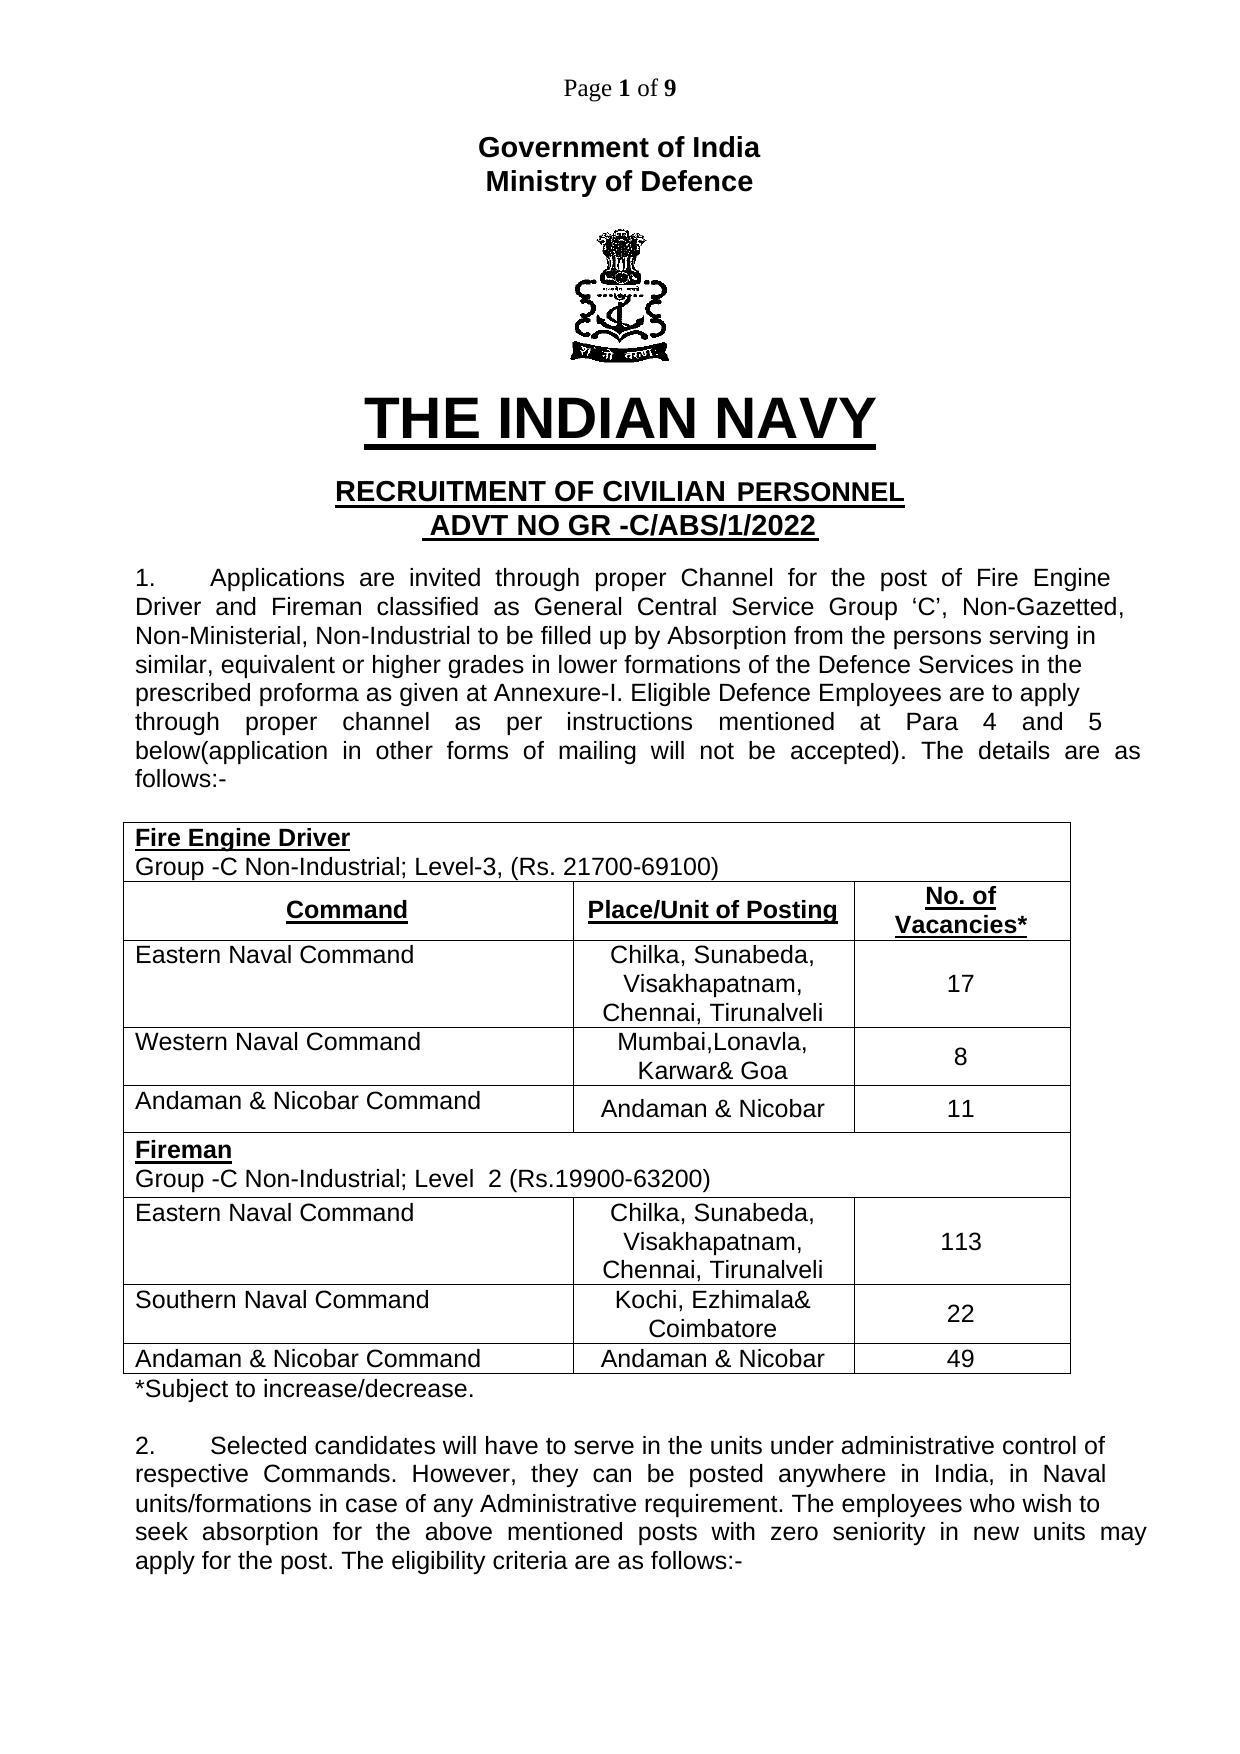 Indian Navy Fire Engine Driver, Fireman Recruitment 2022 - Page 3